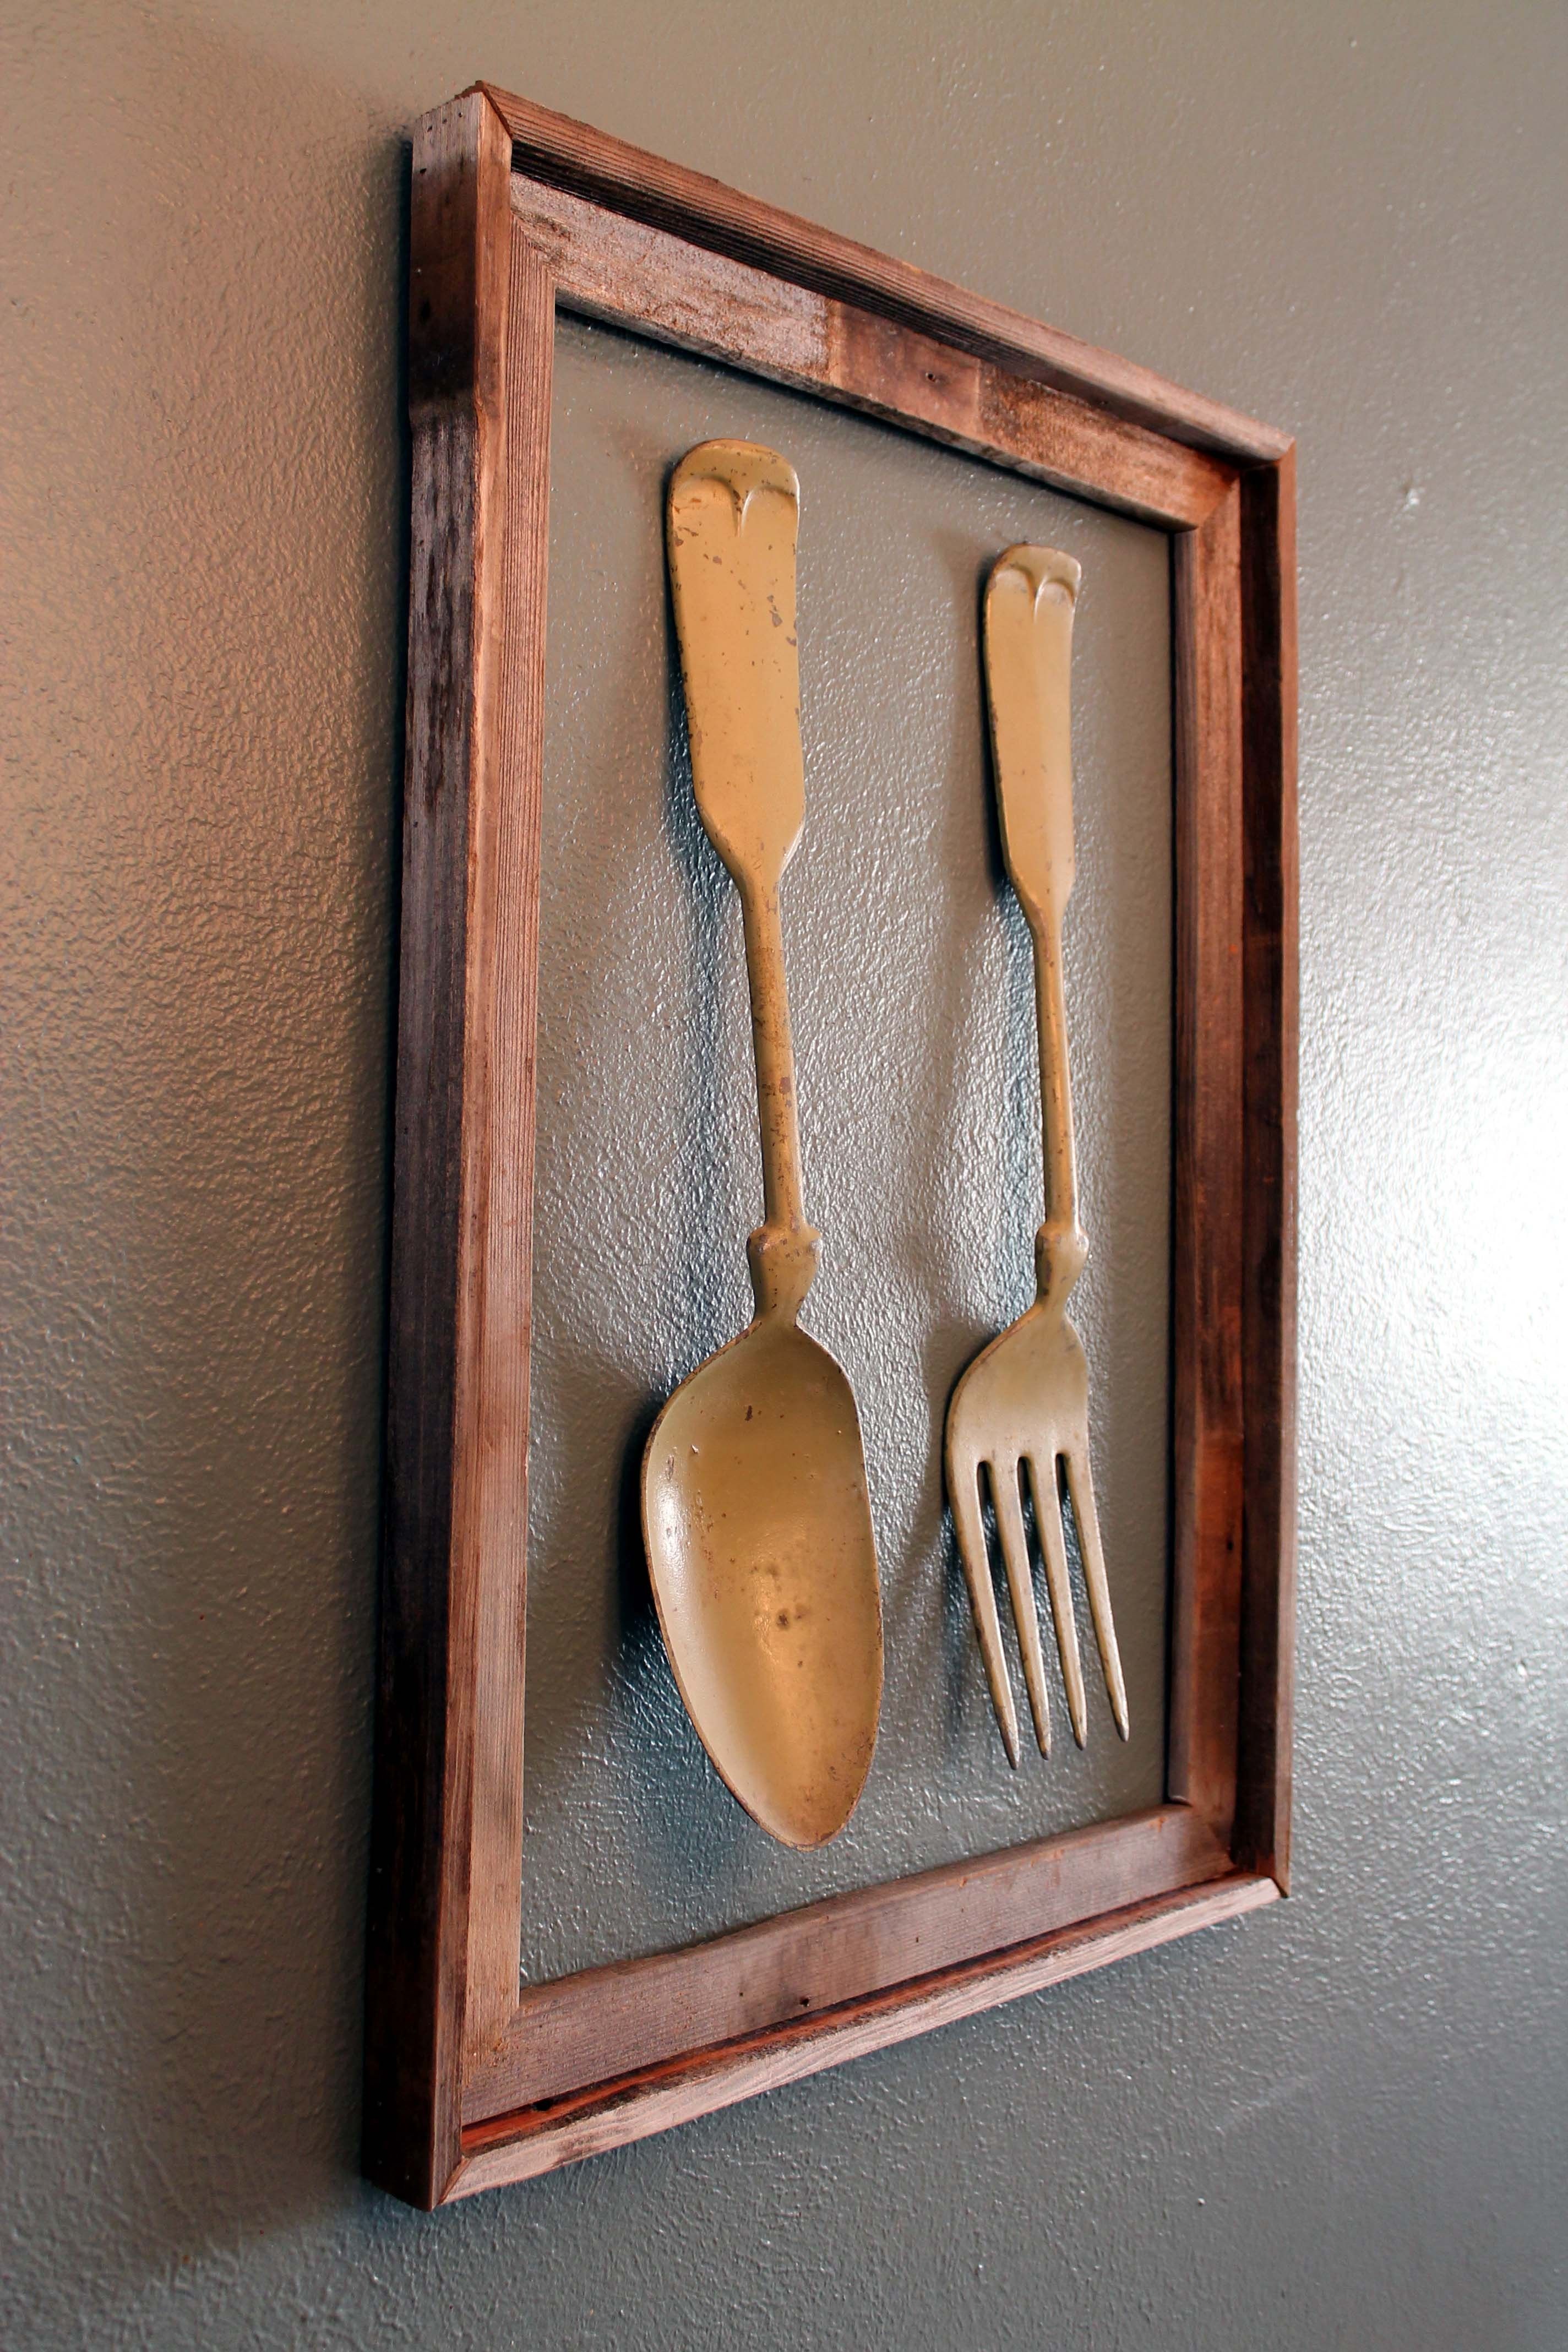 Spoon, Fences Pertaining To Silverware Wall Art (View 1 of 15)